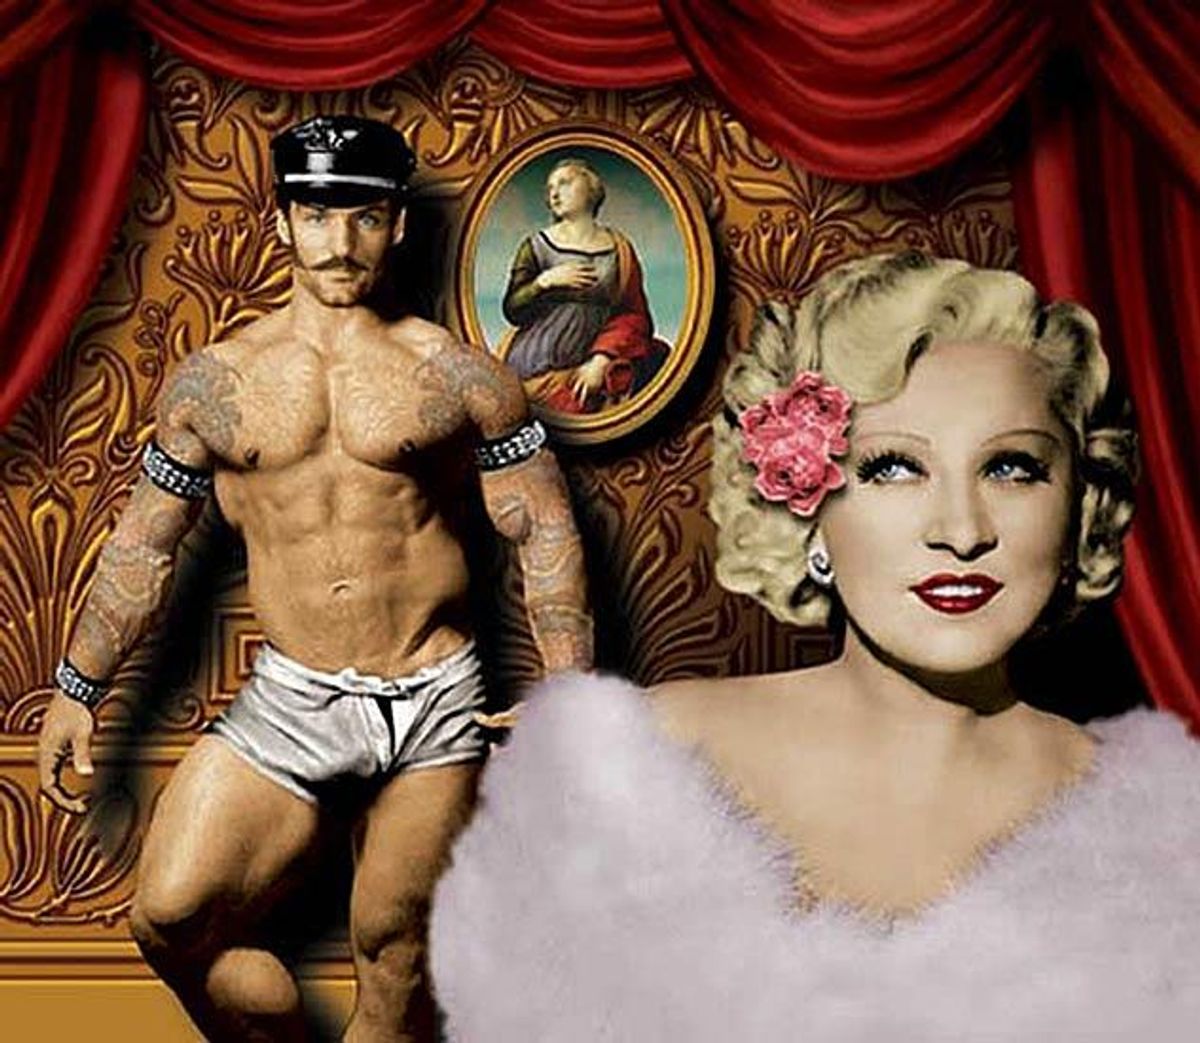 Erotic City: This Weekend's Tom of Finland Art Fair in L.A.